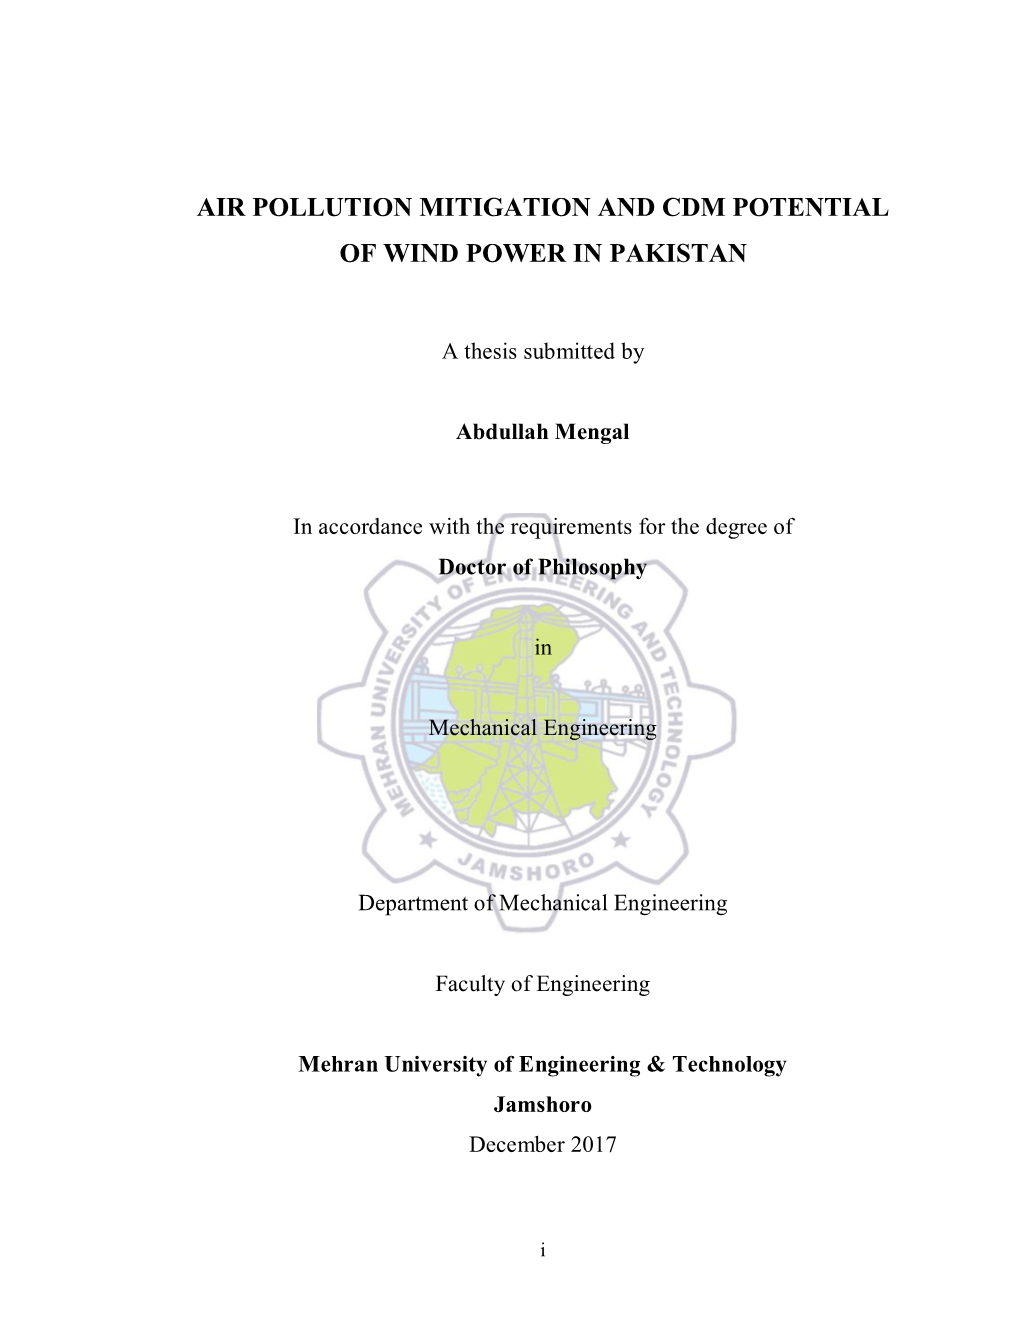 Air Pollution Mitigation and Cdm Potential of Wind Power in Pakistan